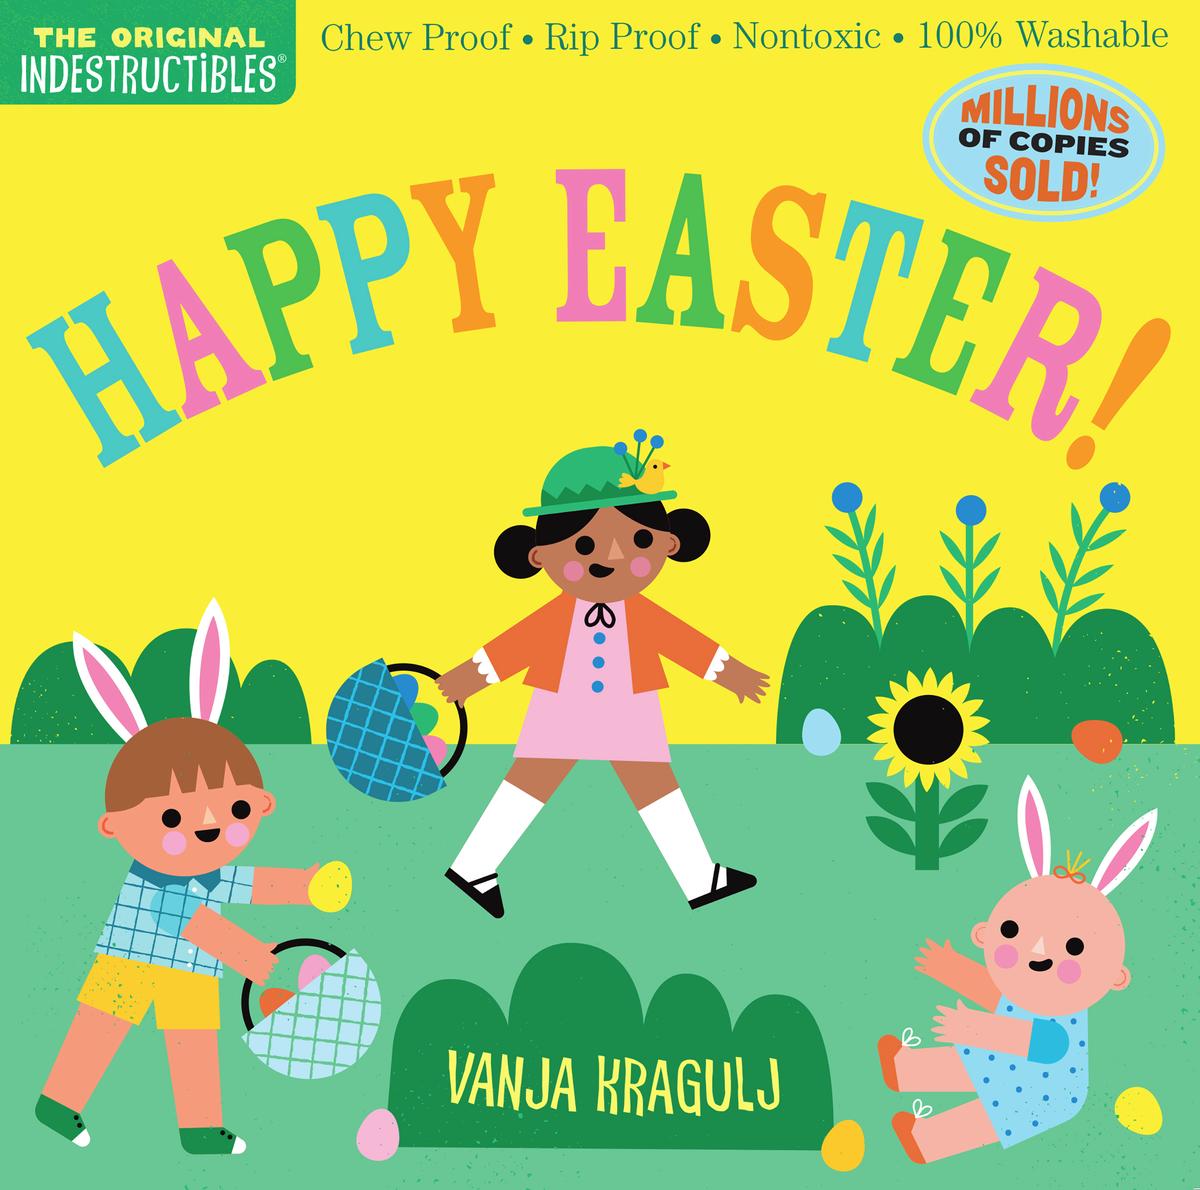 Indestructibles - Happy Easter!: Chew Proof · Rip Proof · Nontoxic · 100% Washable (Book for Babies, Newborn Books, Safe to Chew)